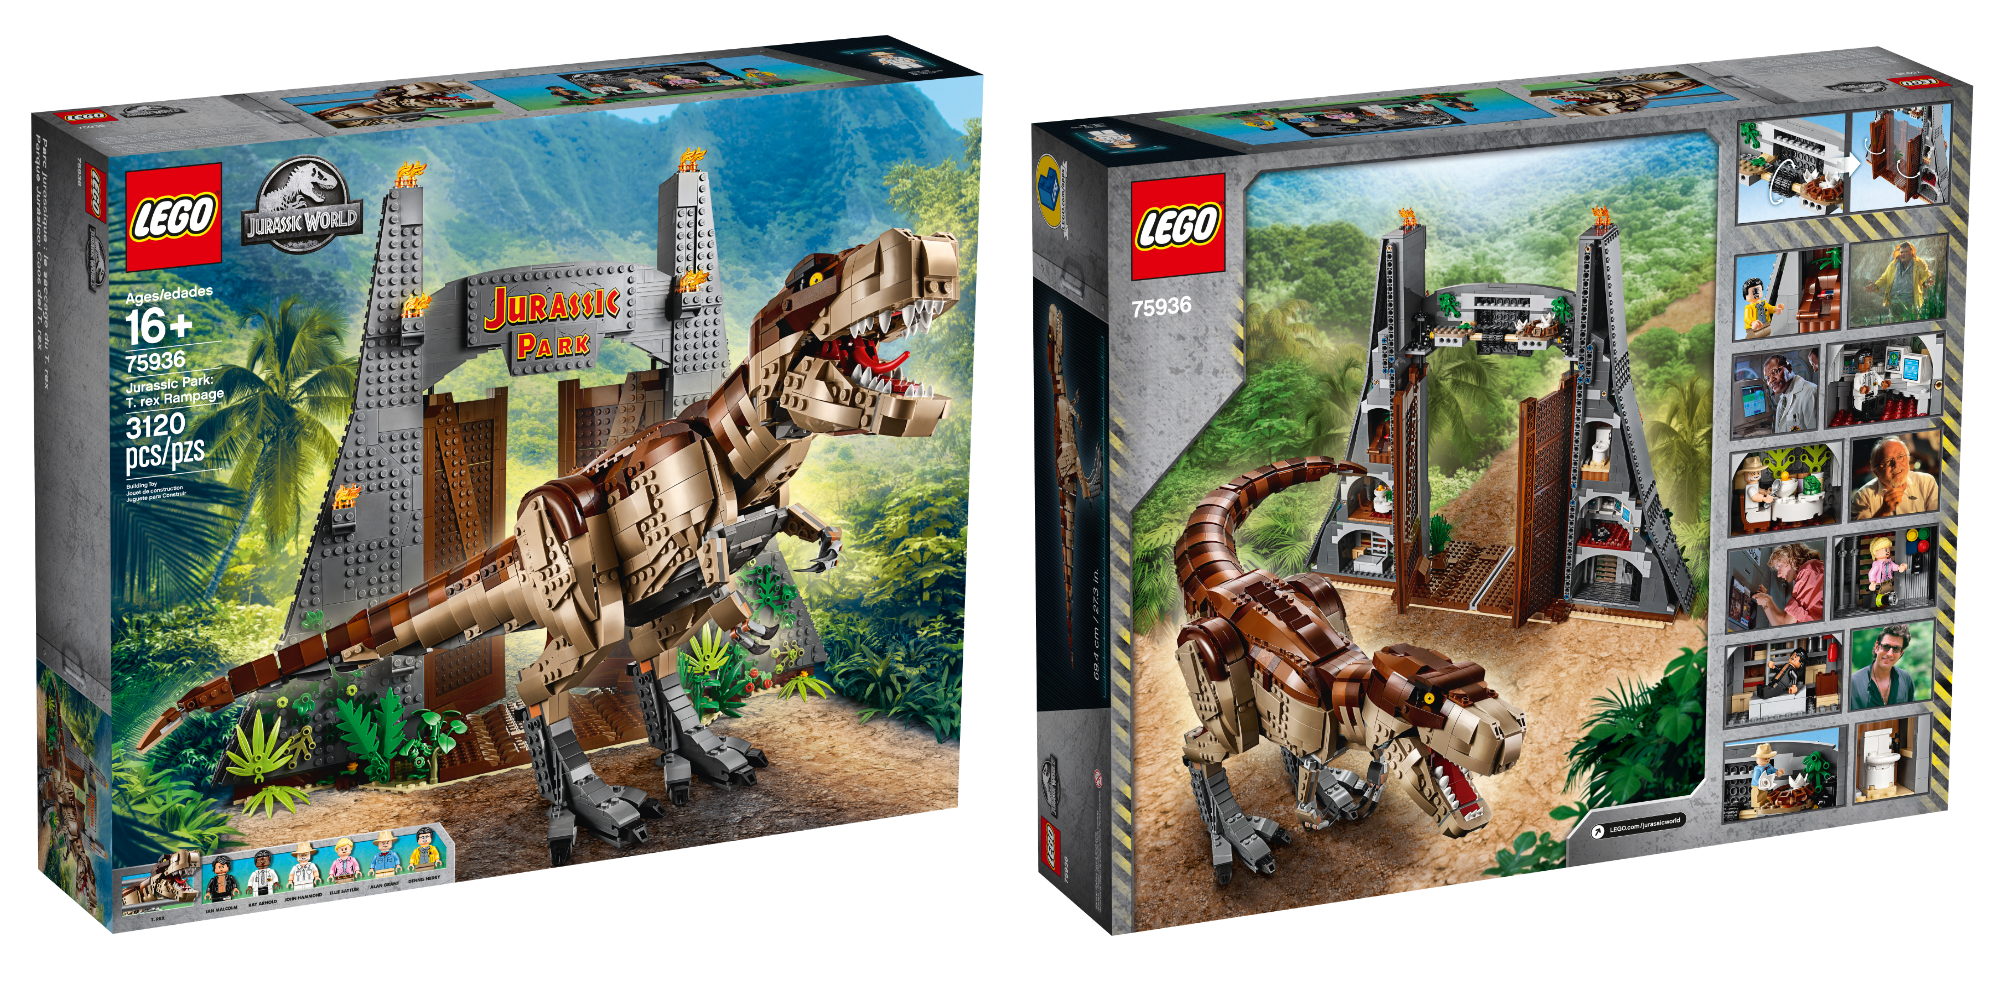 LEGO Jurassic Park brings the film to life with 3,120 ...